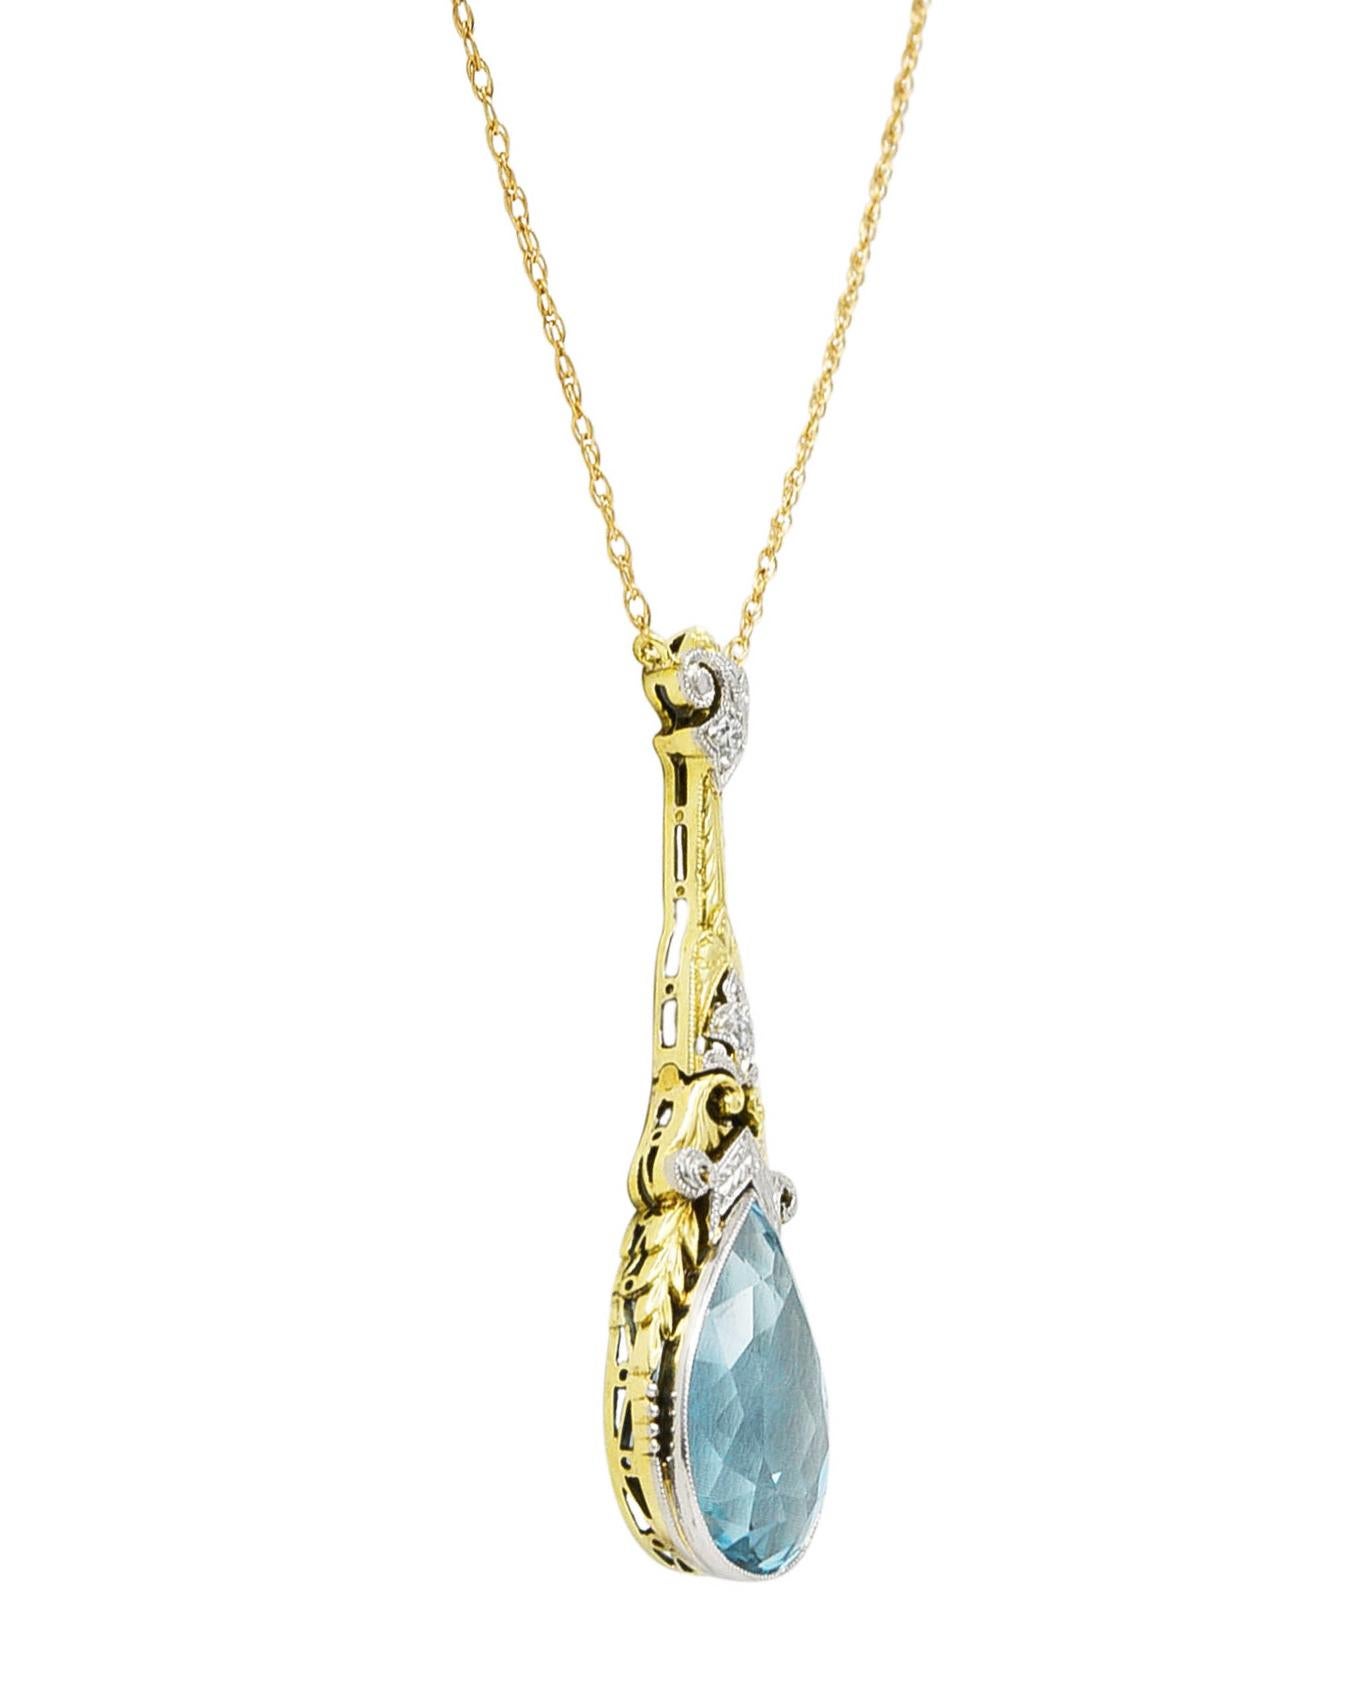 Designed as a spiga link chain with a central station featuring a pear cut aquamarine. Weighing approximately 5.53 carats total - transparent light blue in color. Set in a platinum bezel with an ornate gold wheat motif surround. With pierced scroll